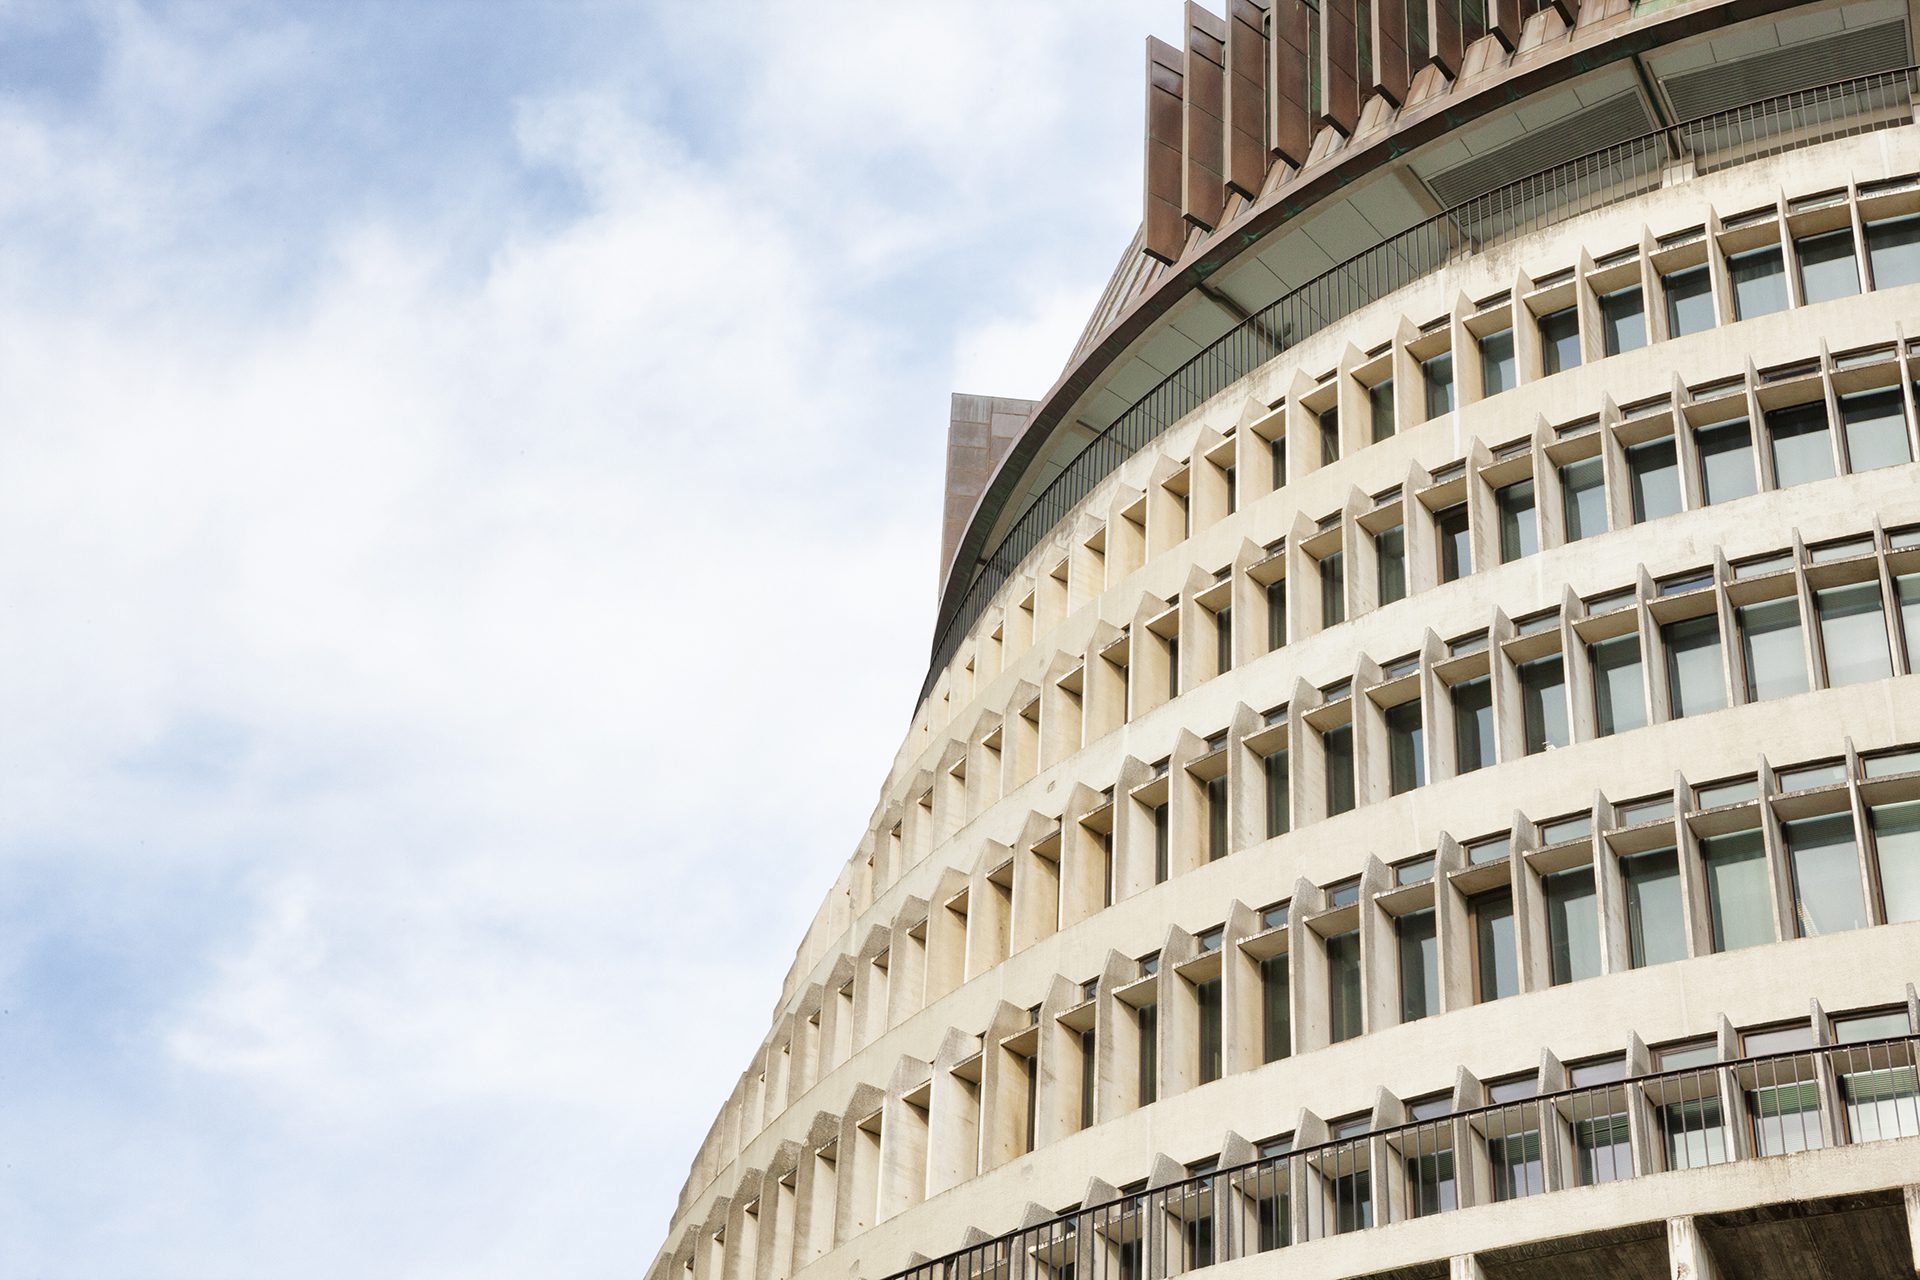 The Beehive Parliament Building in Wellington, New Zealand